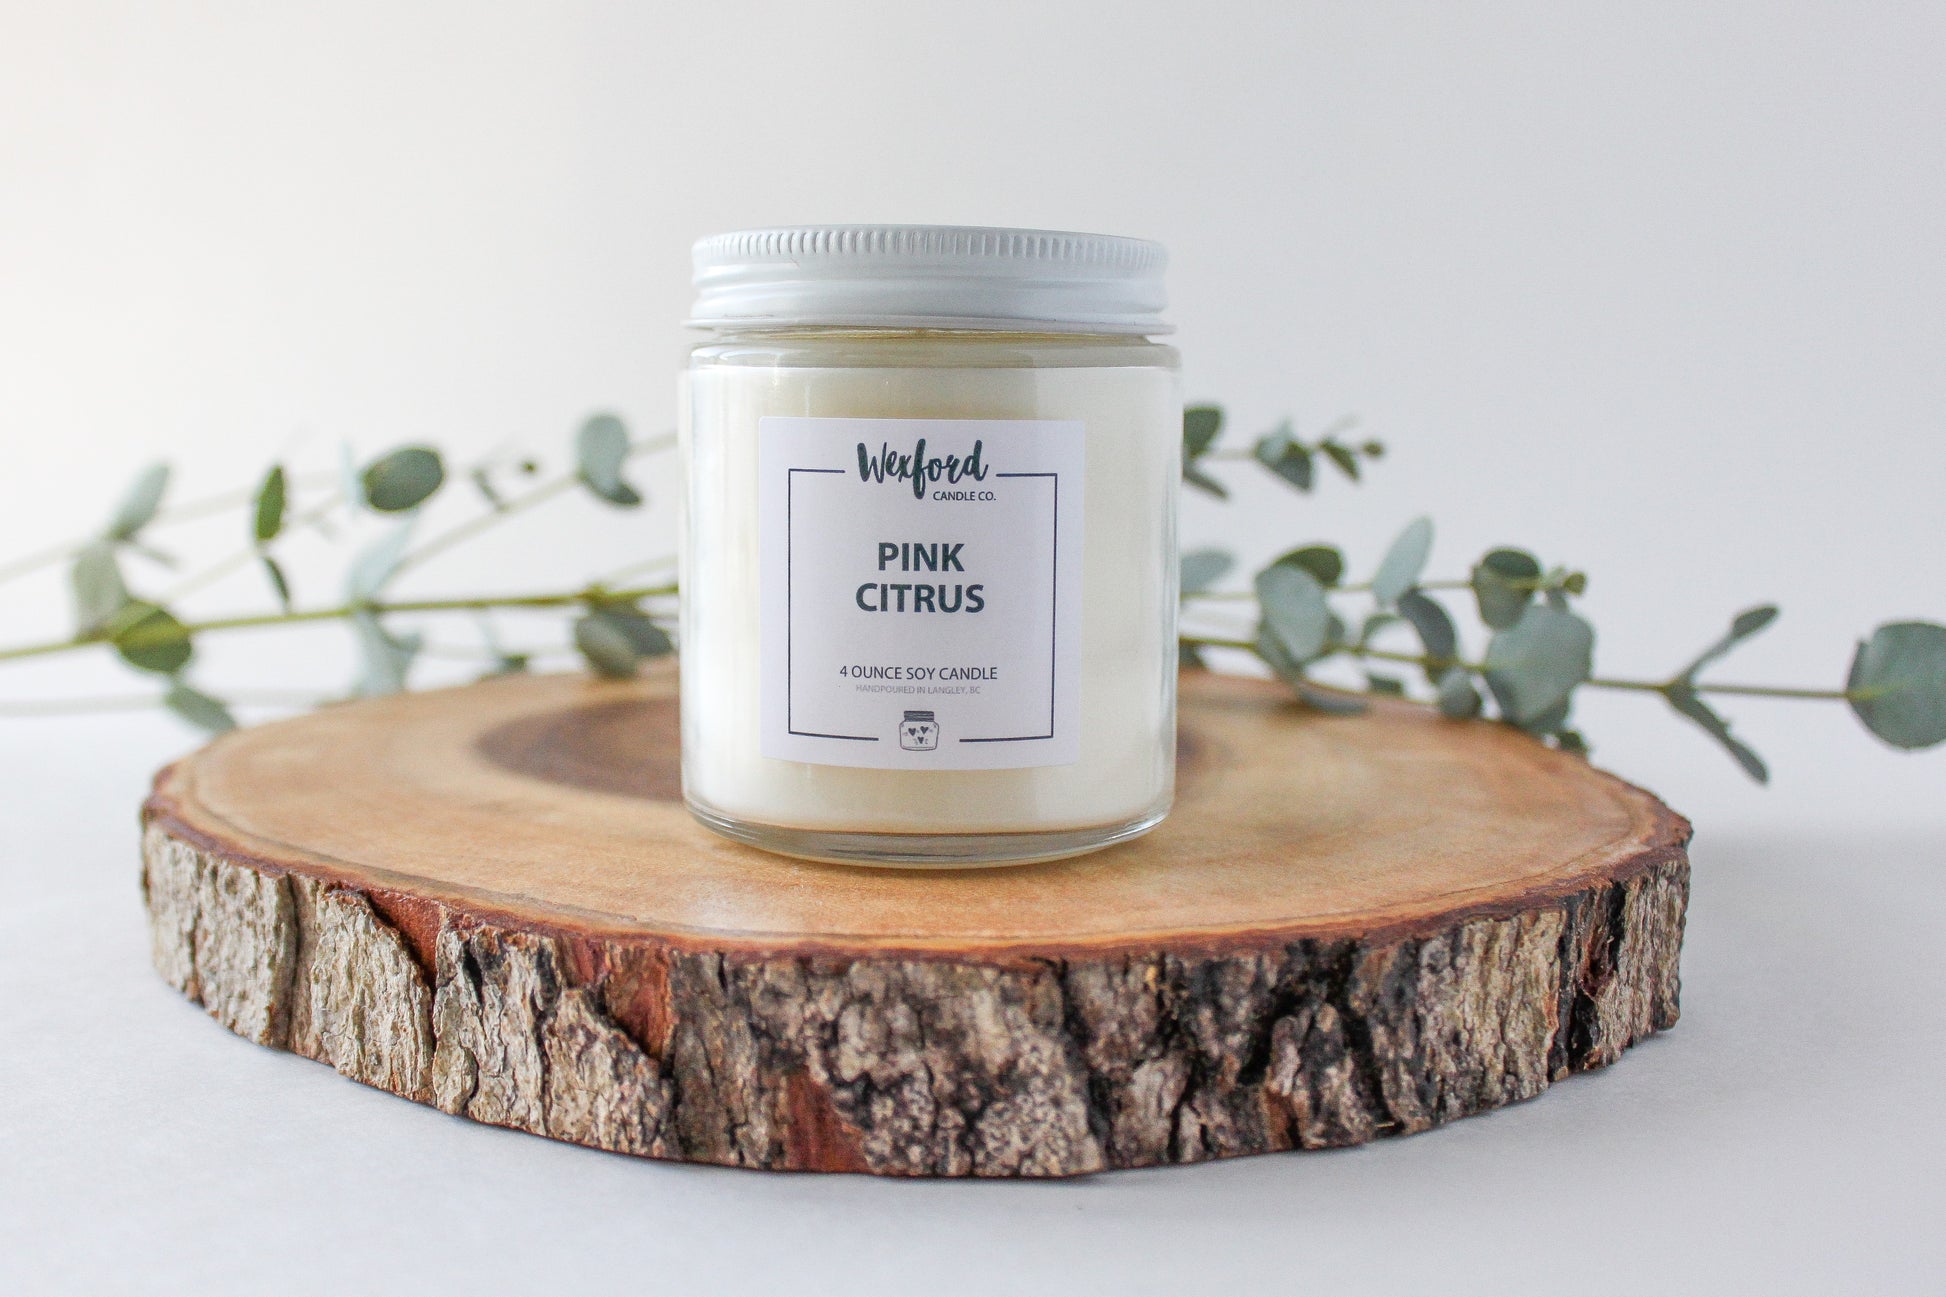 Pink Citrus Soy Candle - Wexford Candle Co.